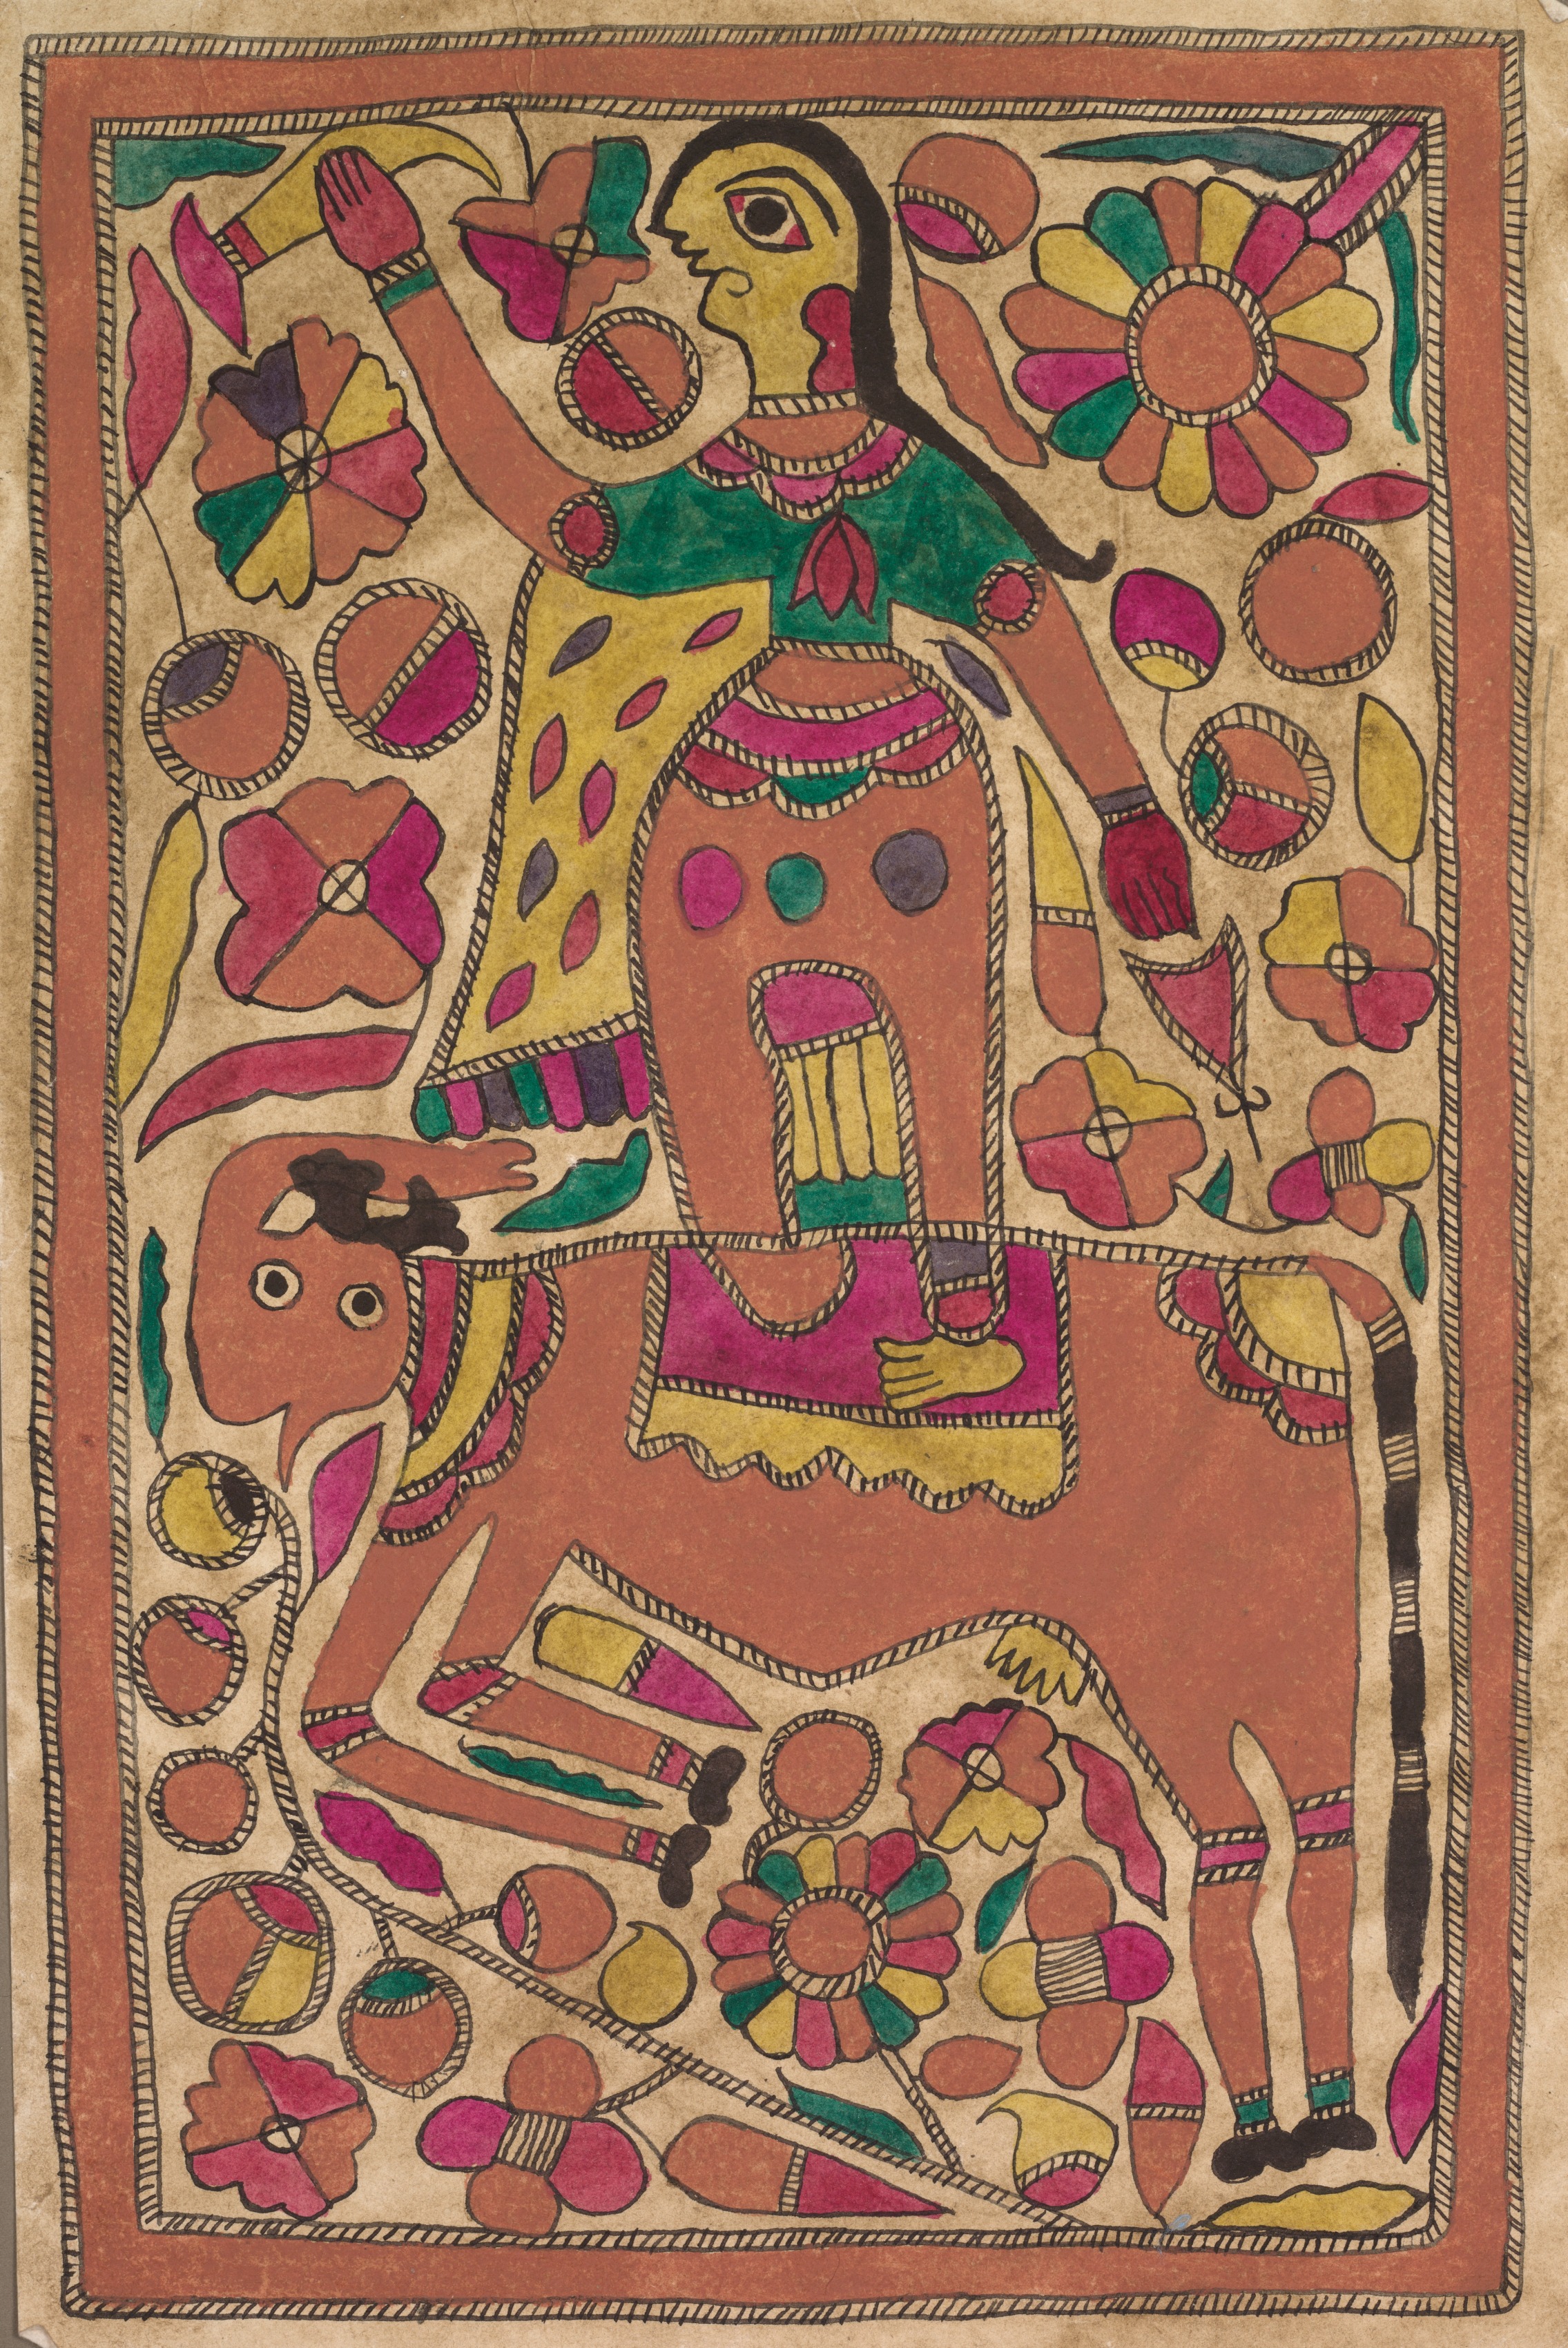 Rider and four-legged creature with floral motif